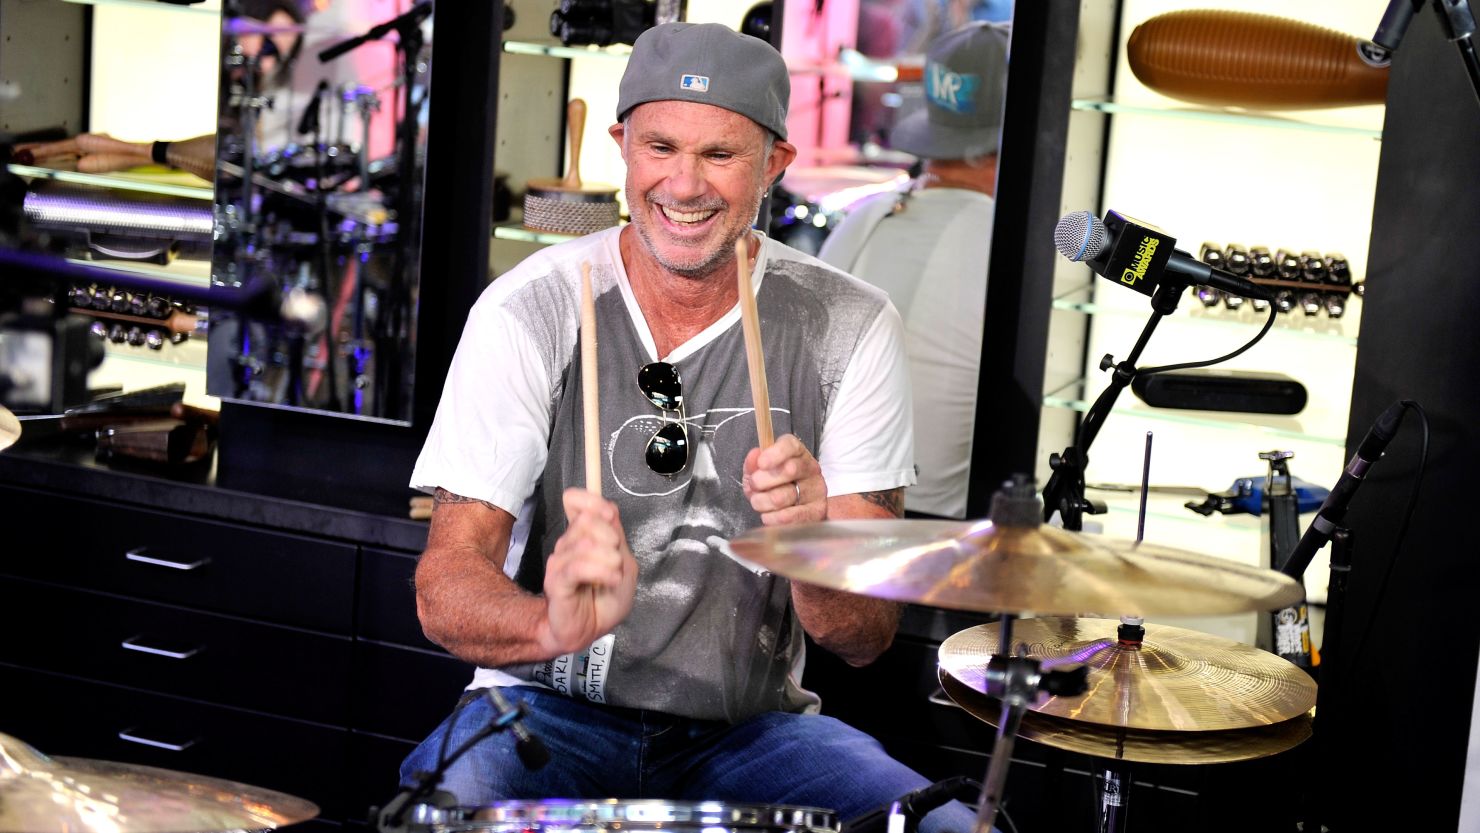 Drummer Chad Smith has been in the Red Hot Chili Peppers since 1988.